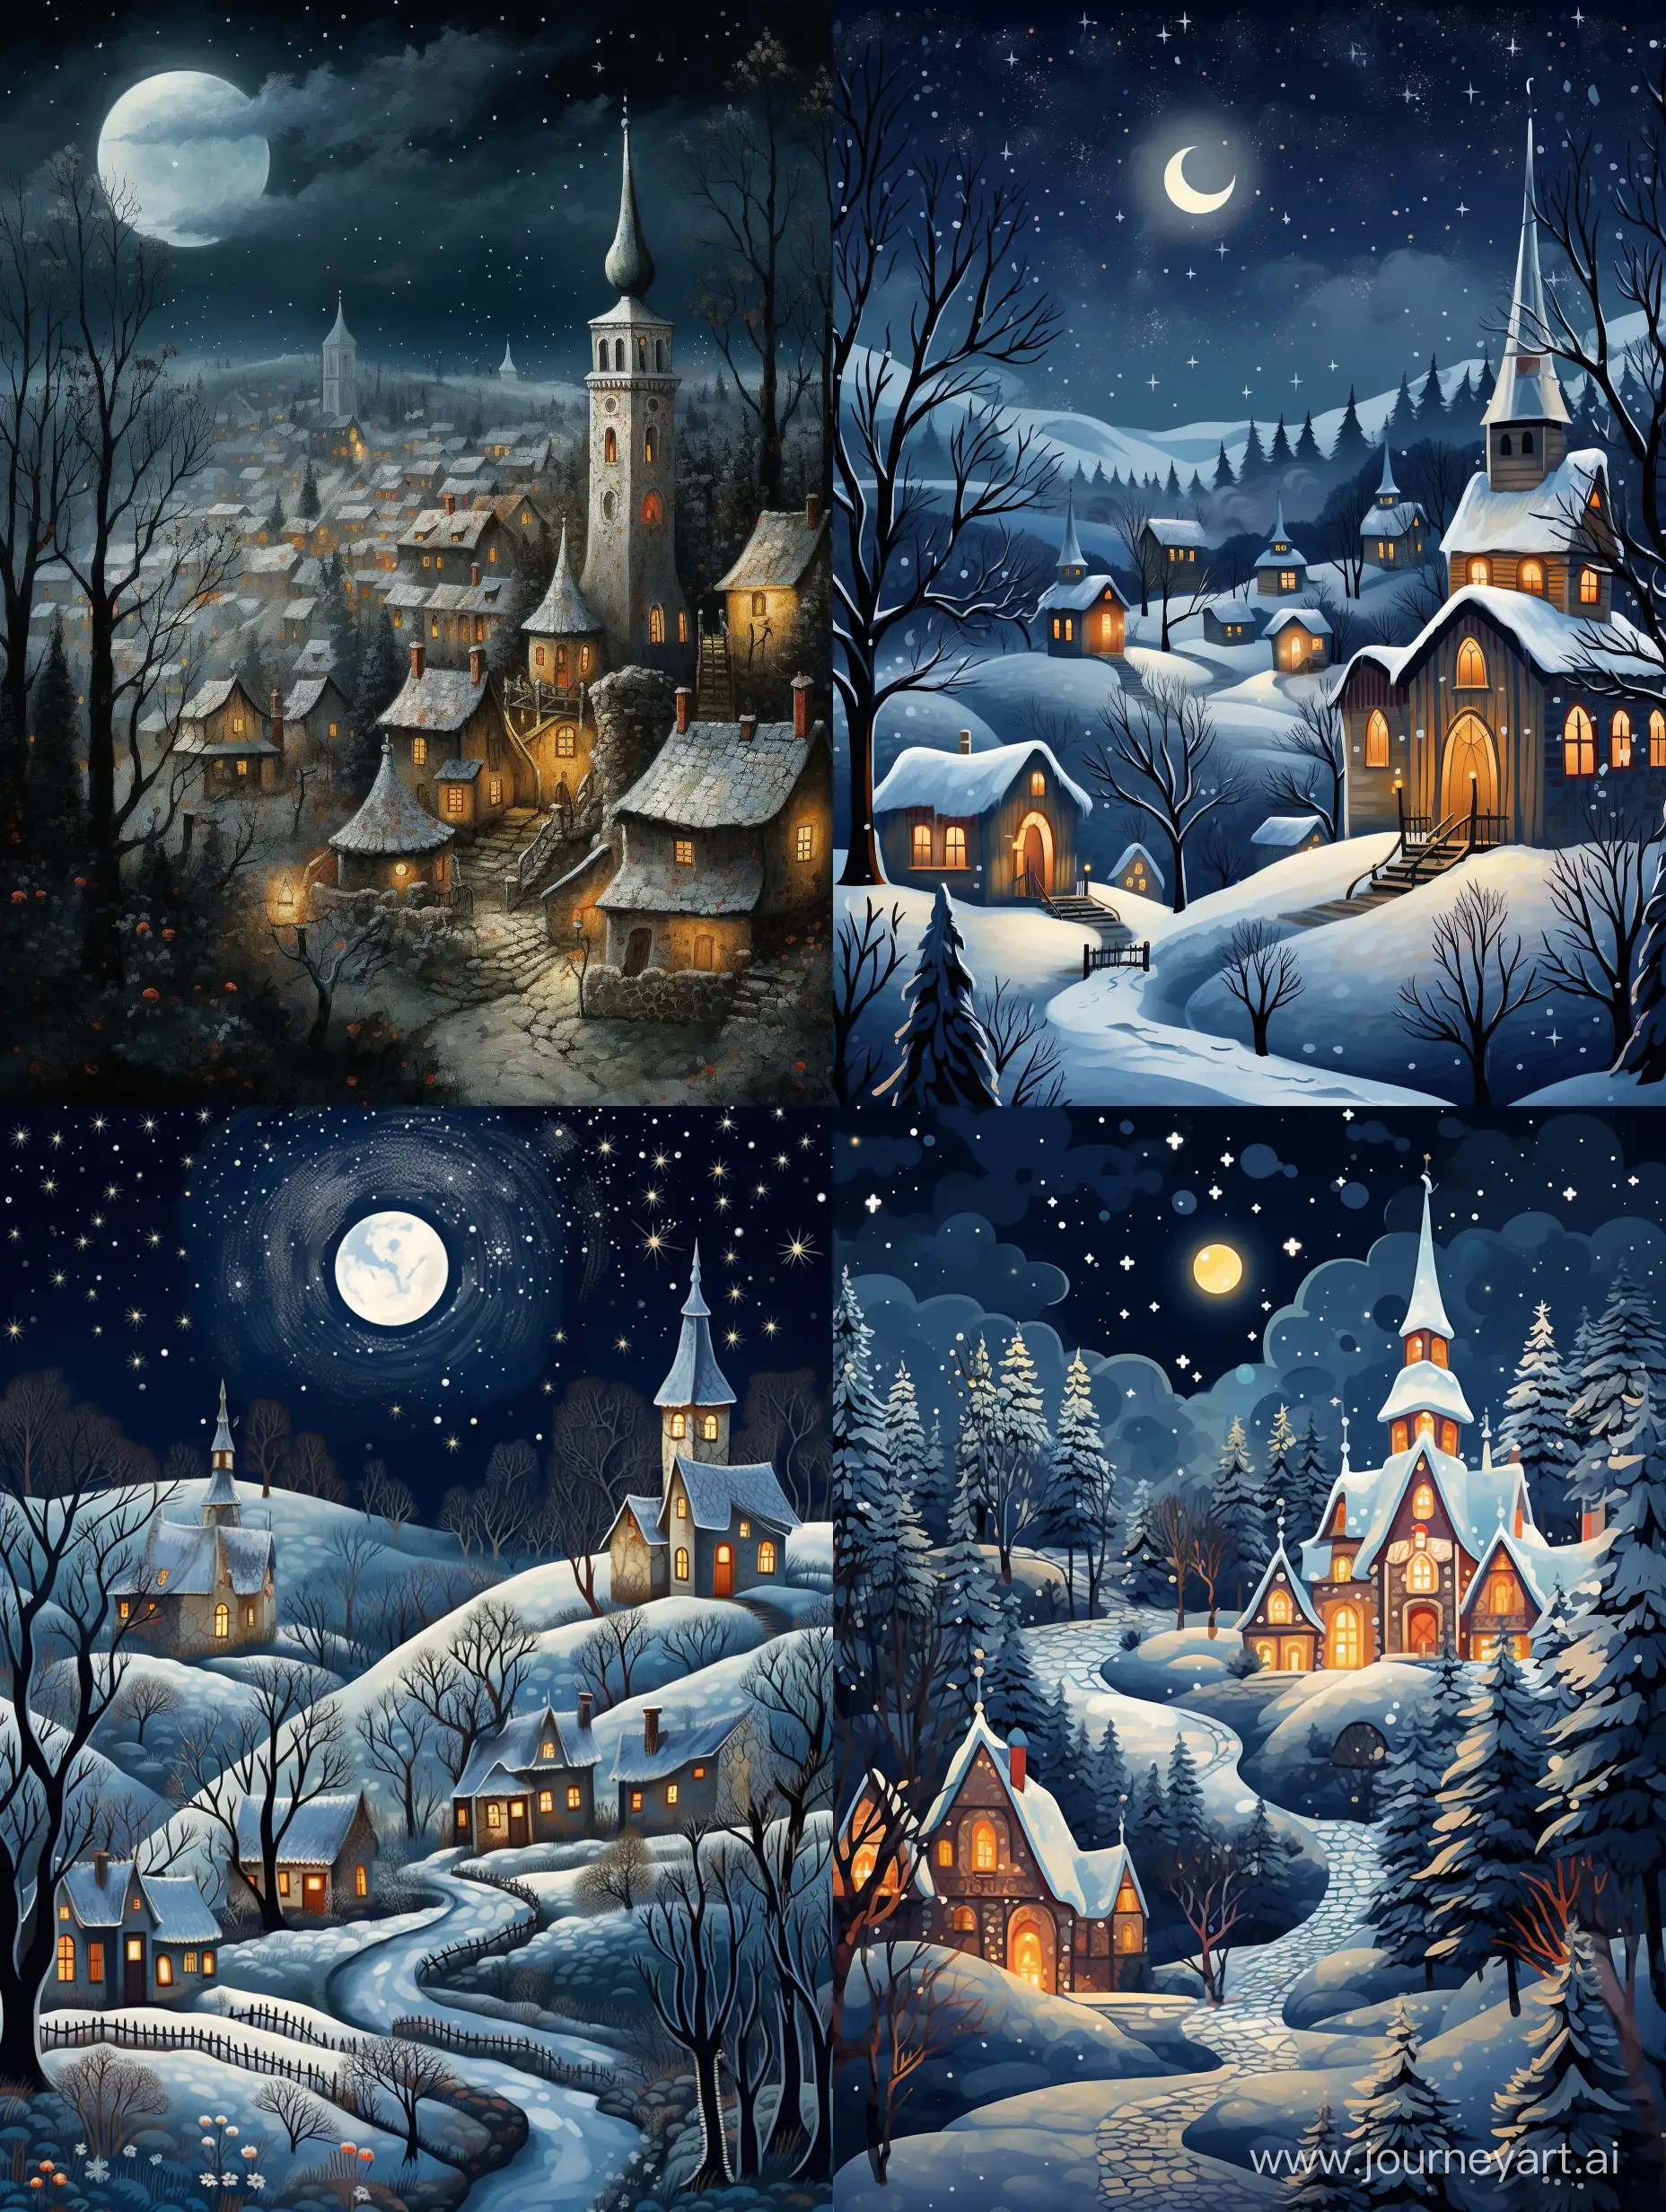 Enchanting-Christmas-Night-in-an-Ancient-Village-with-Moonlit-Folk-Festivities